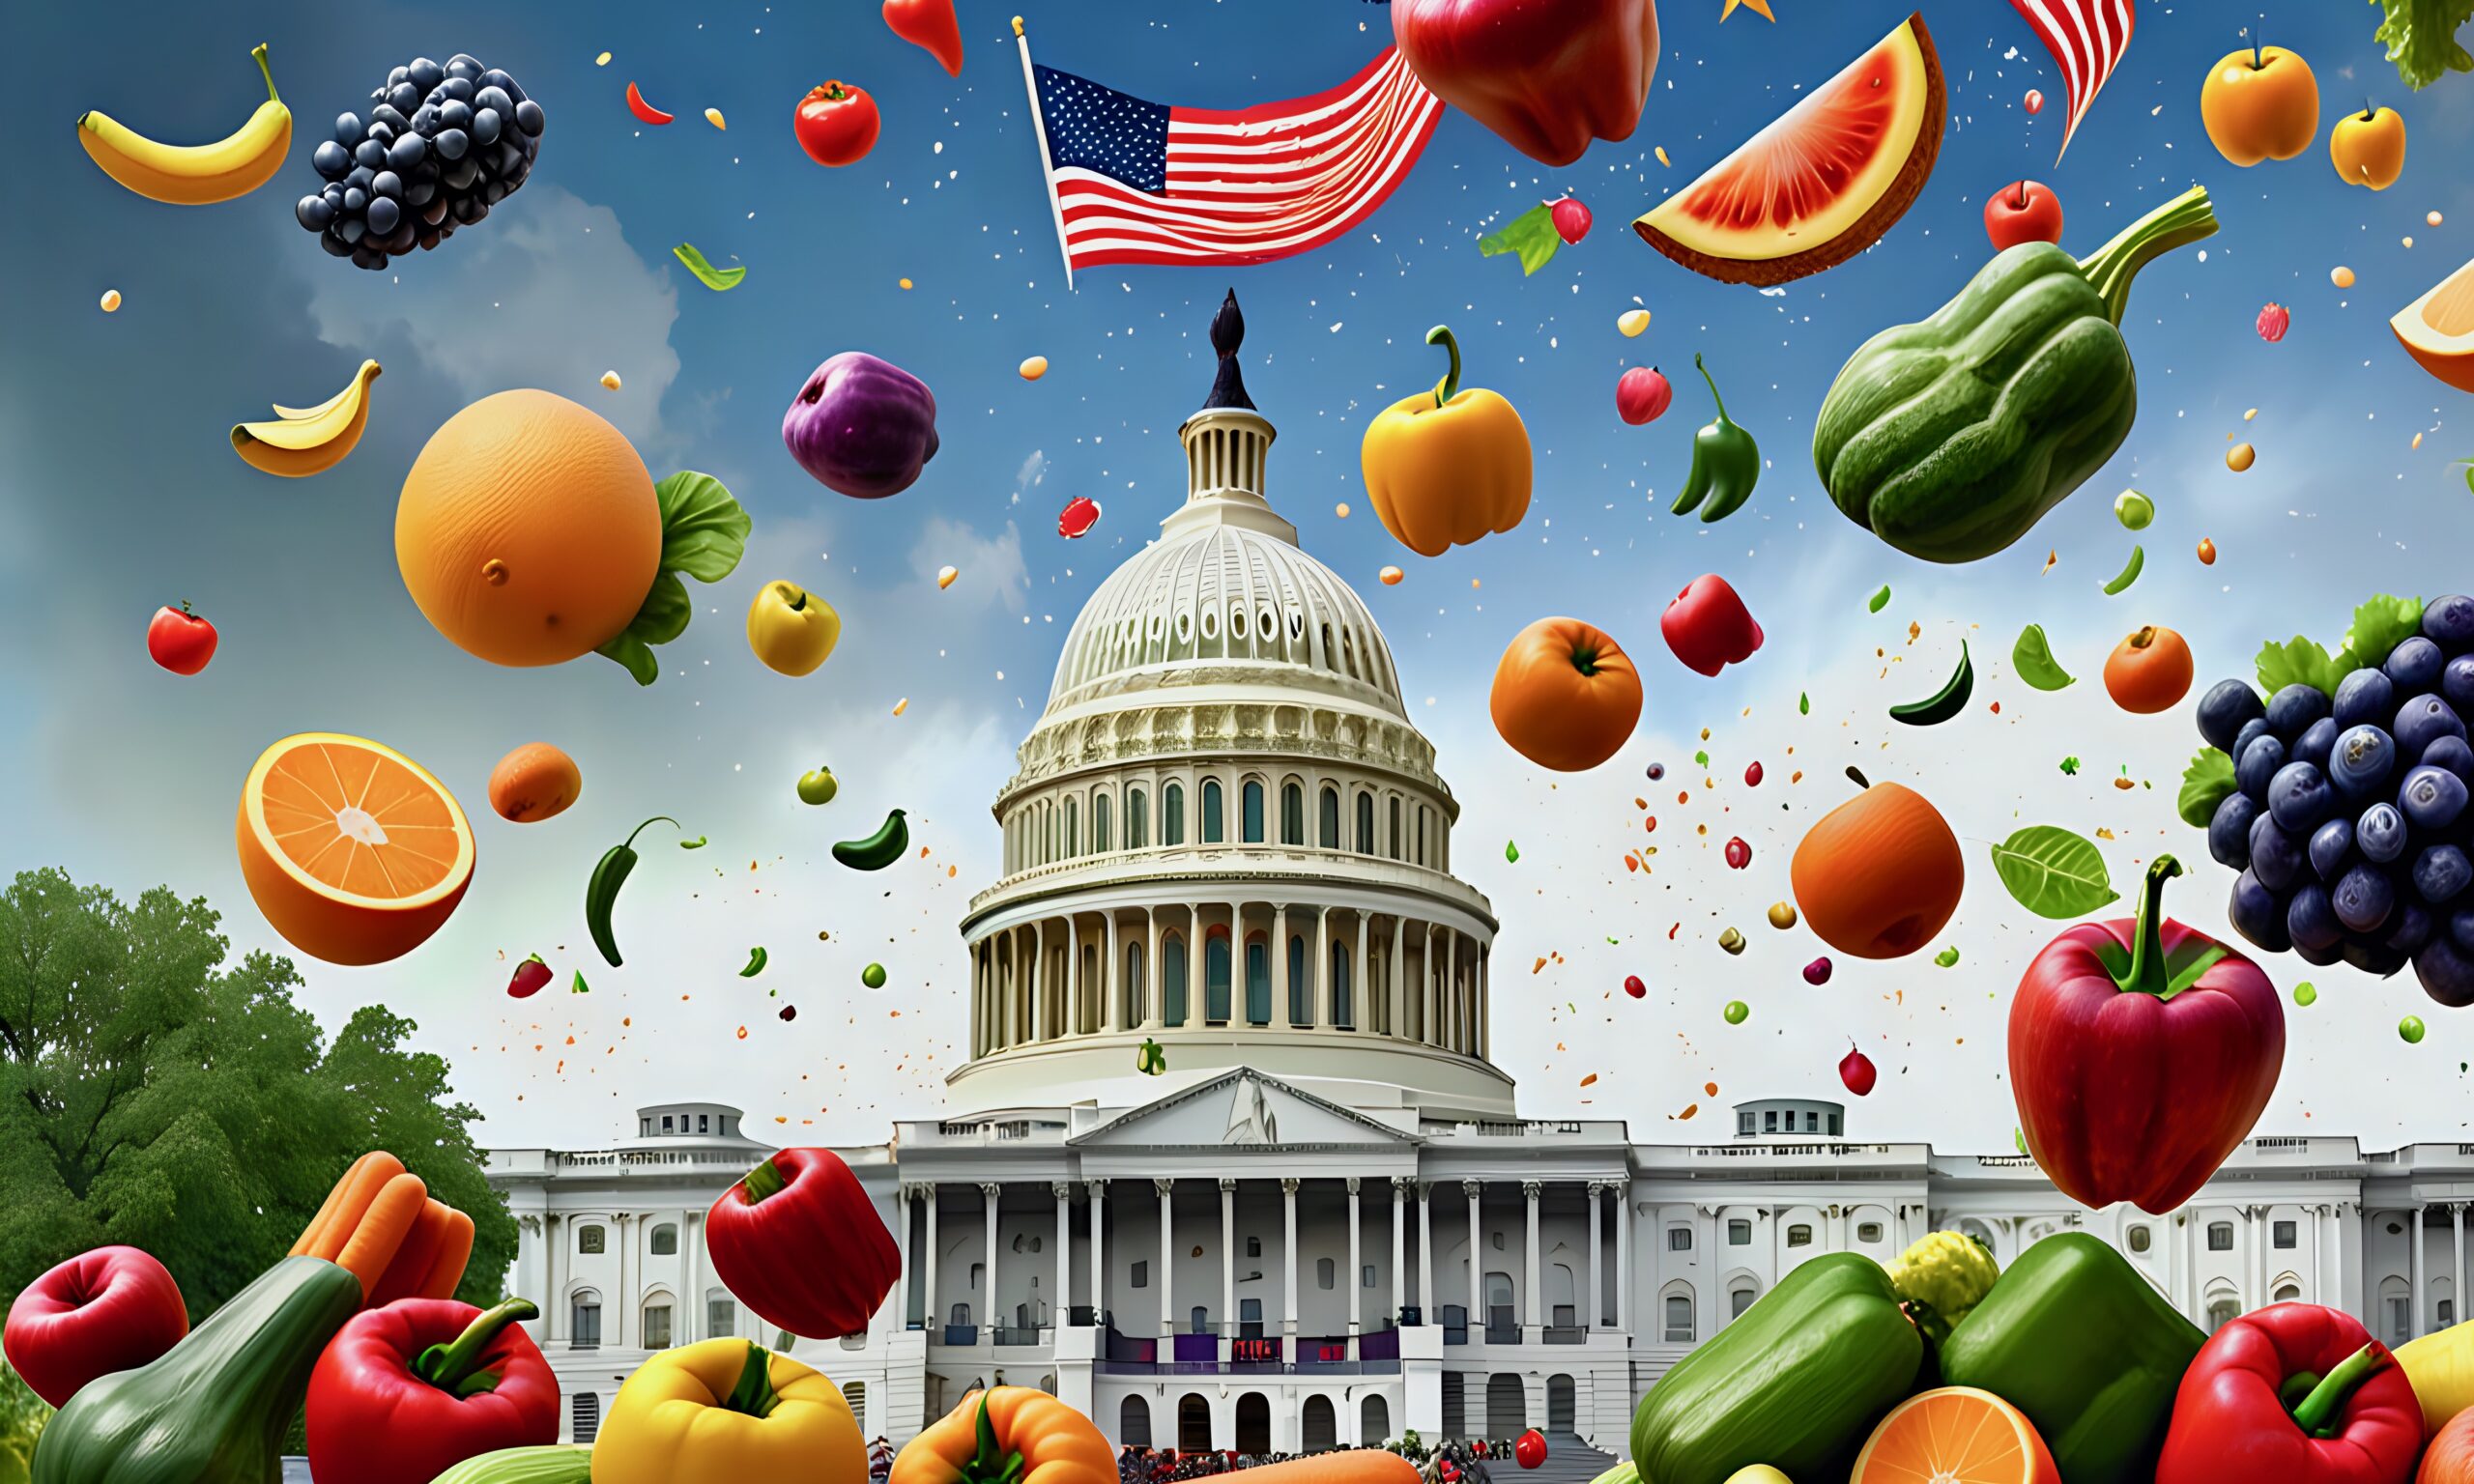 Generative AI digital image depicting the U.S. Capitol with fruits and vegetables raining from the sky. An American flag is also in the sky above the capitol building against a blue sky with light clouds.